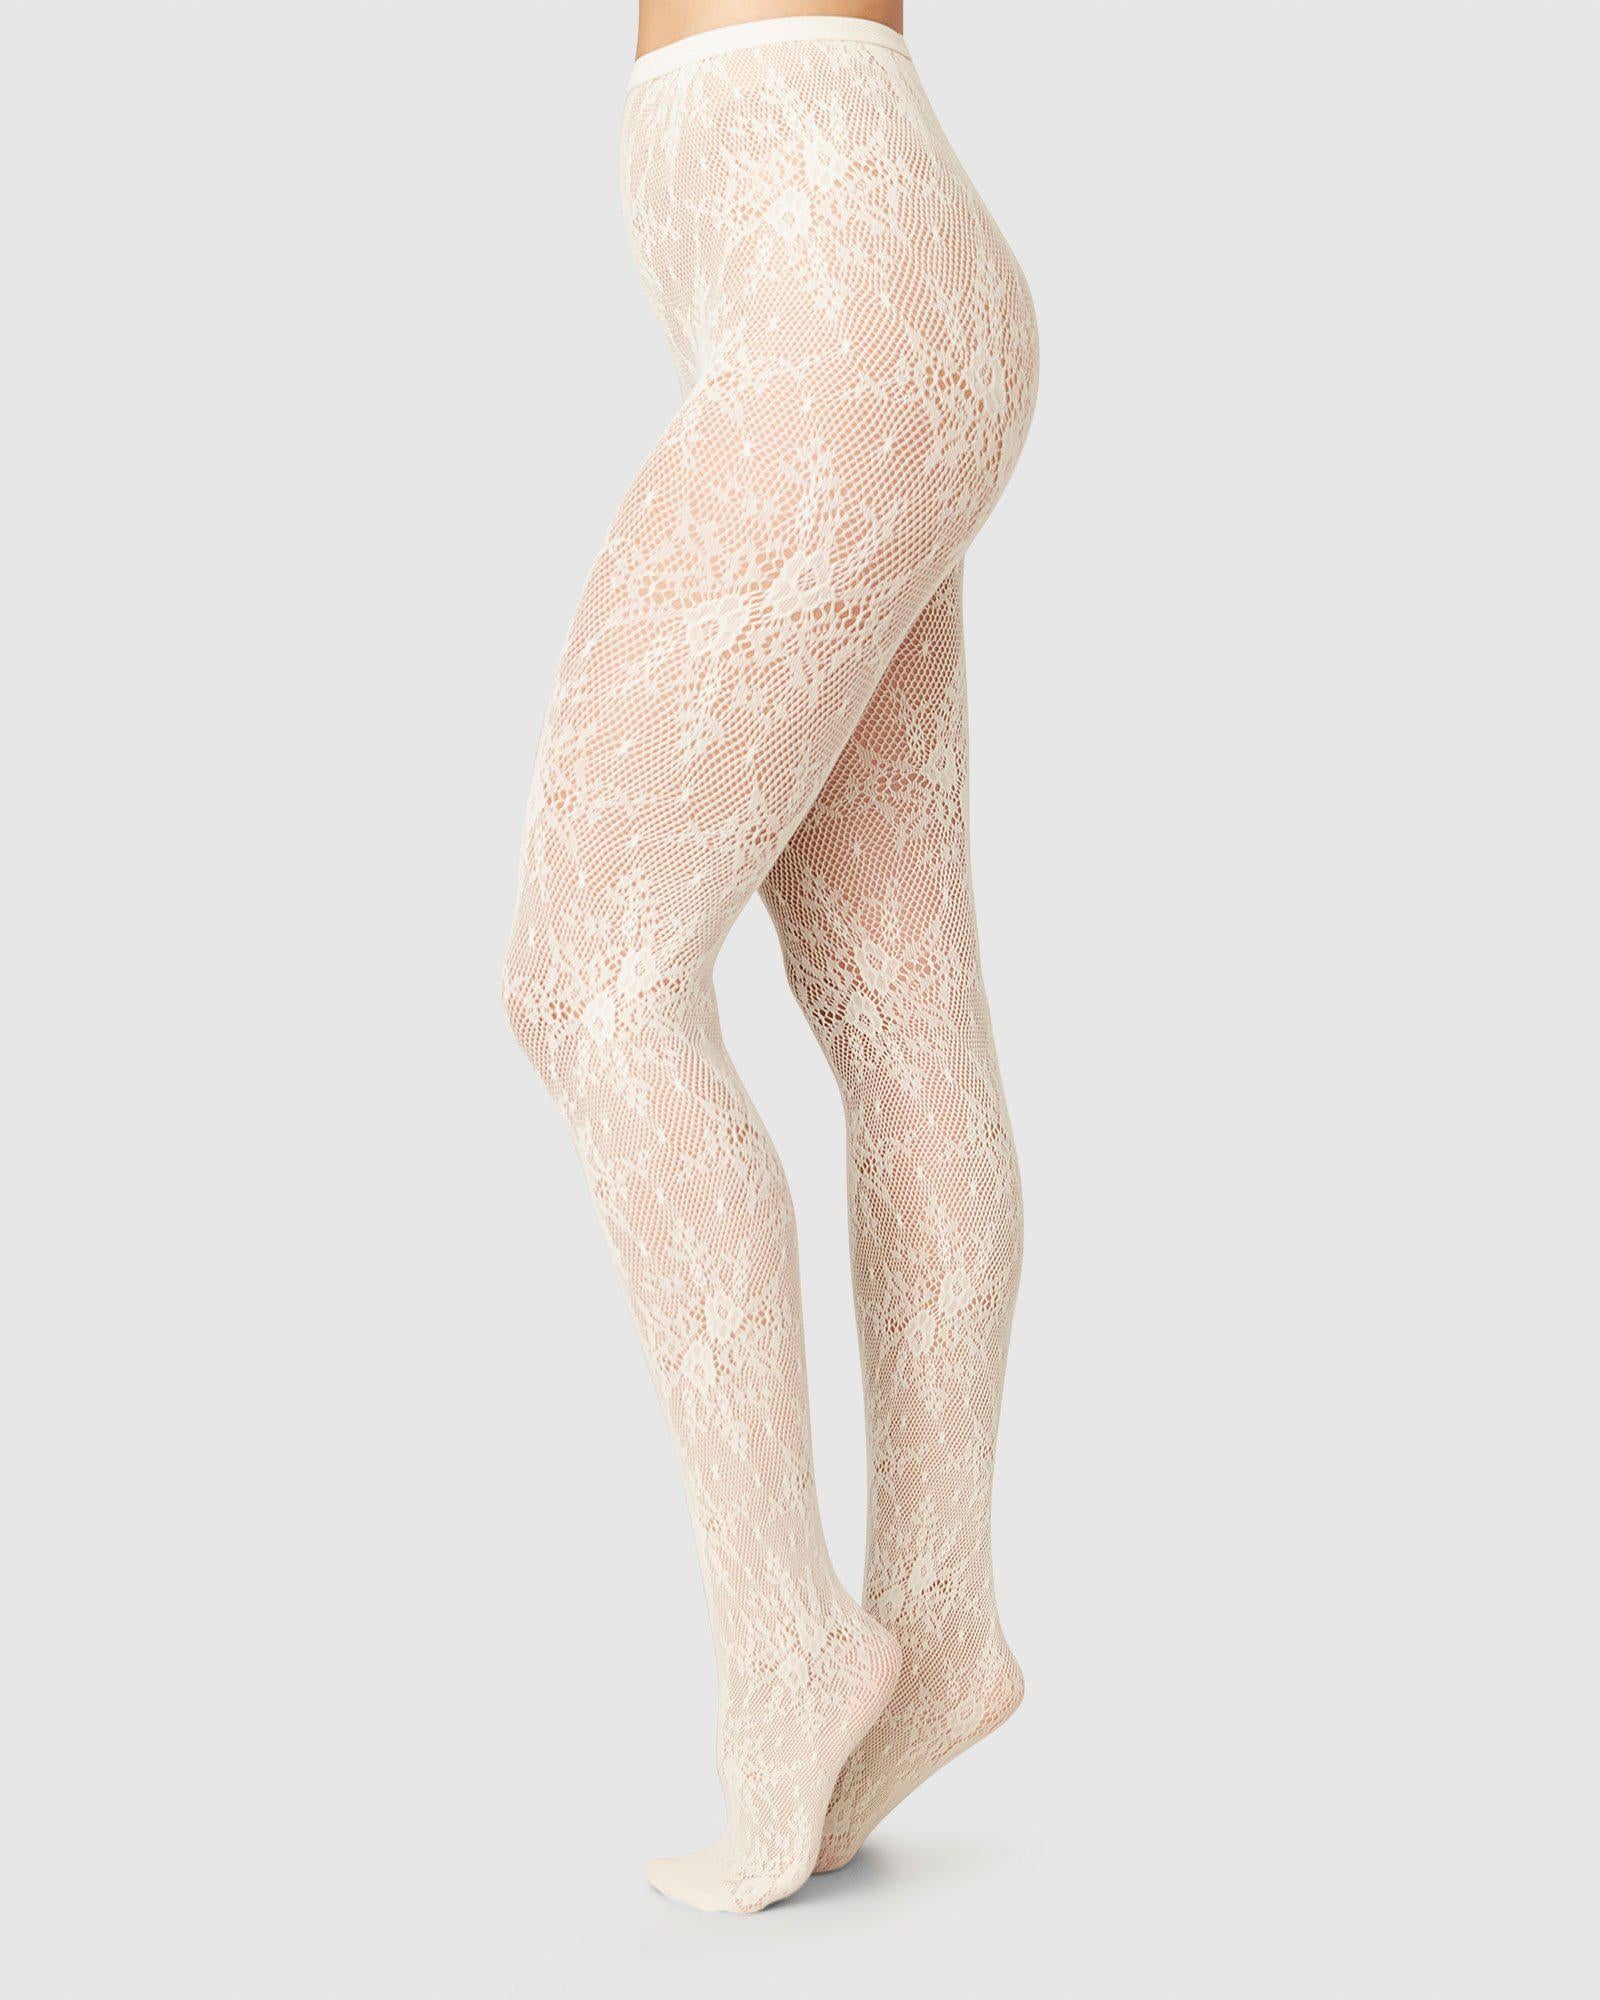 Rosa Lace Tights  Buy now - Swedish Stockings